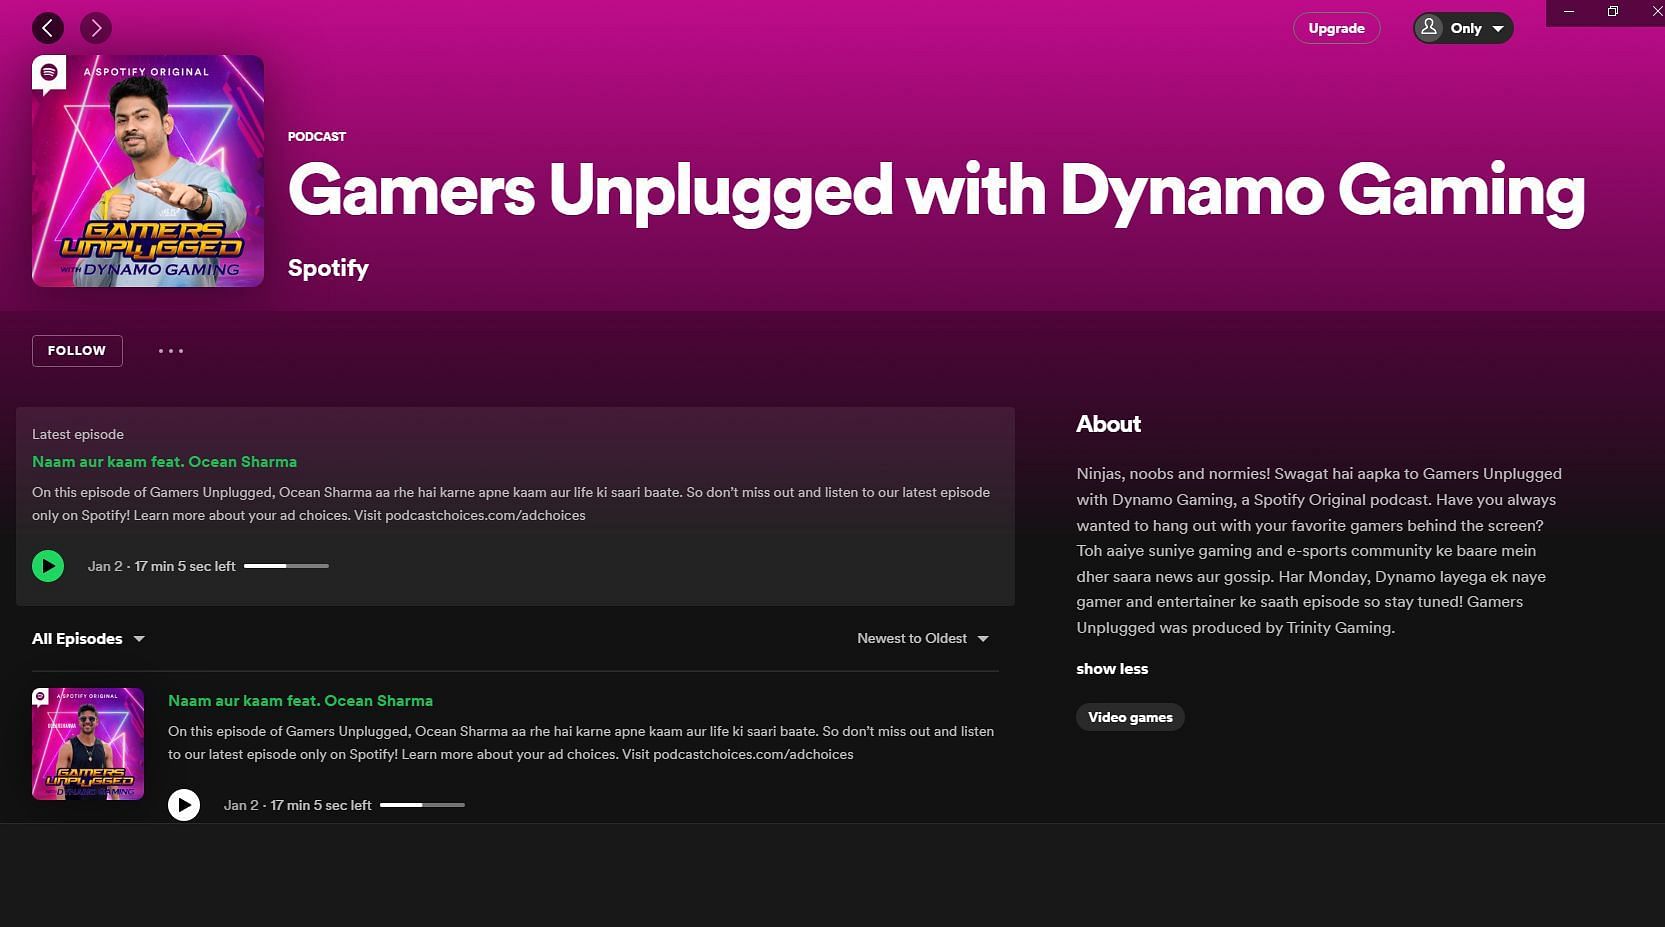 The new episode of Gamers Unplugged (Image via Spotify)